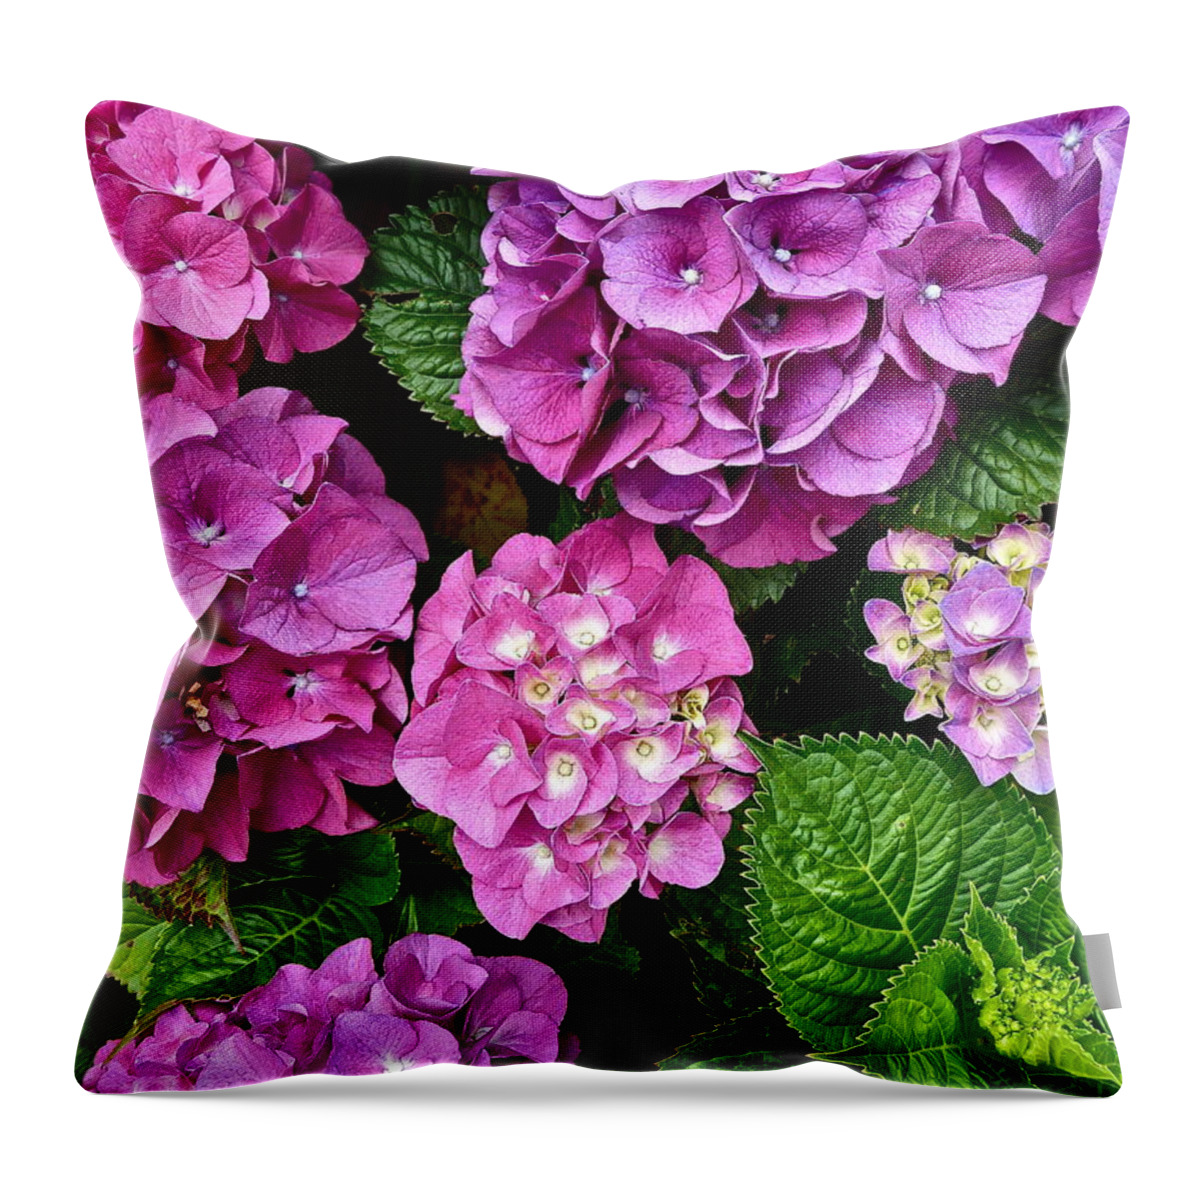 Flowers Throw Pillow featuring the photograph Bright Spot by Diana Hatcher